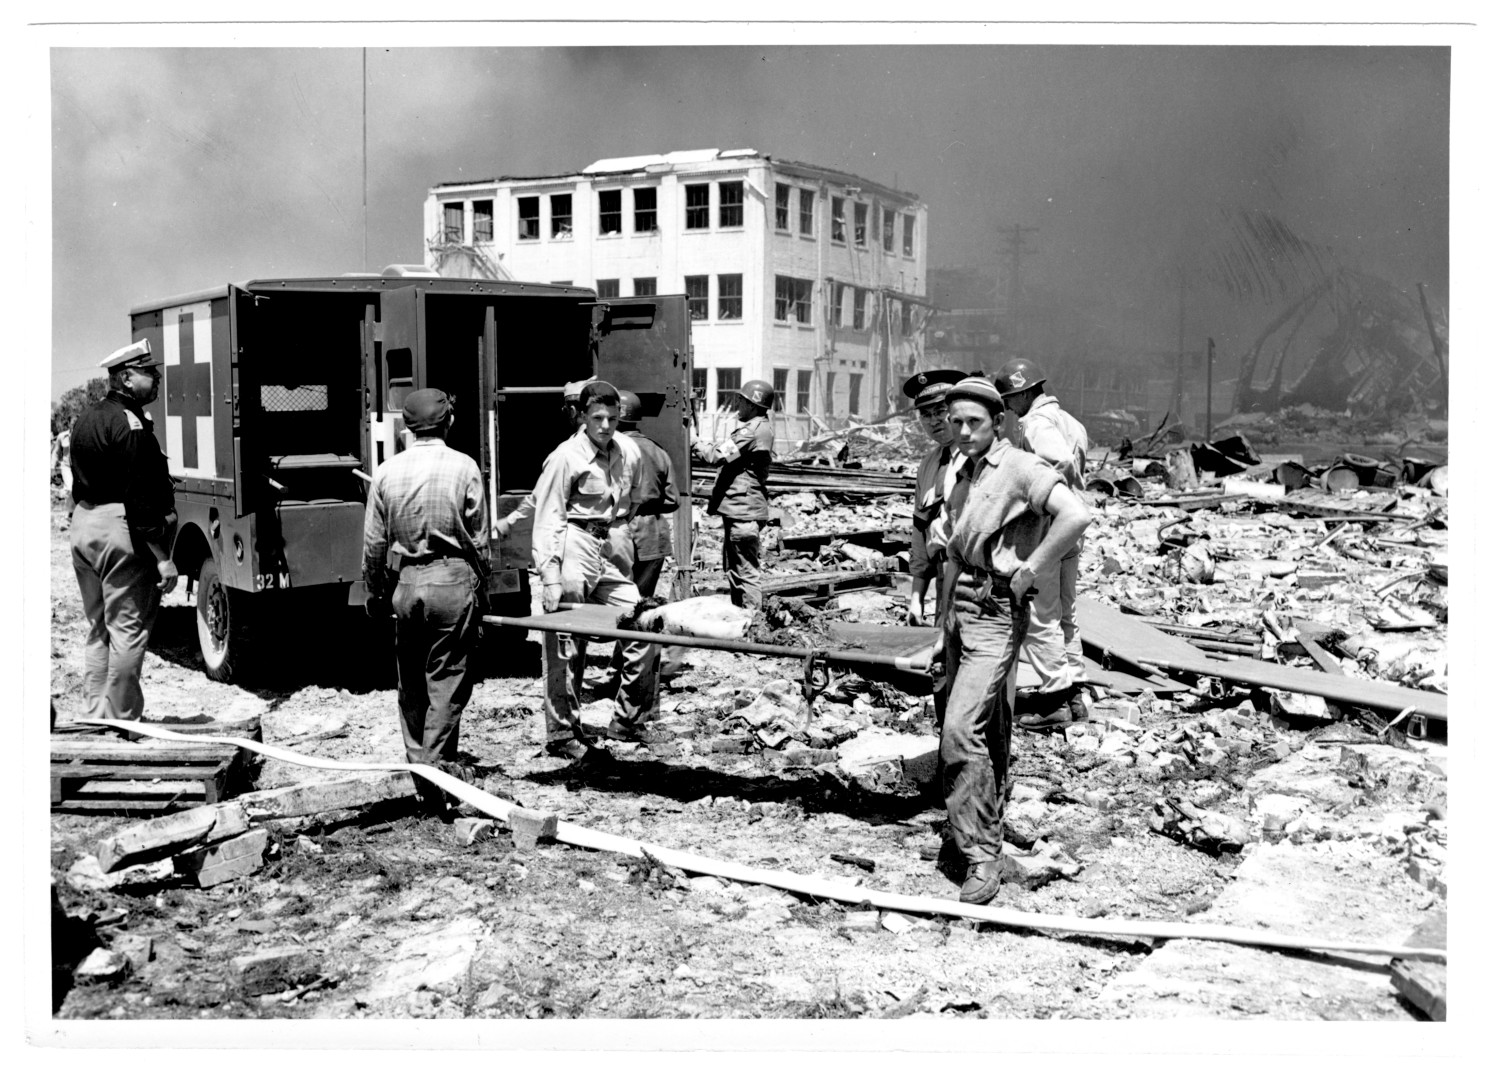 [Rescue workers holding a stretcher near an ambulance after the 1947 Texas City ...1500 x 1078